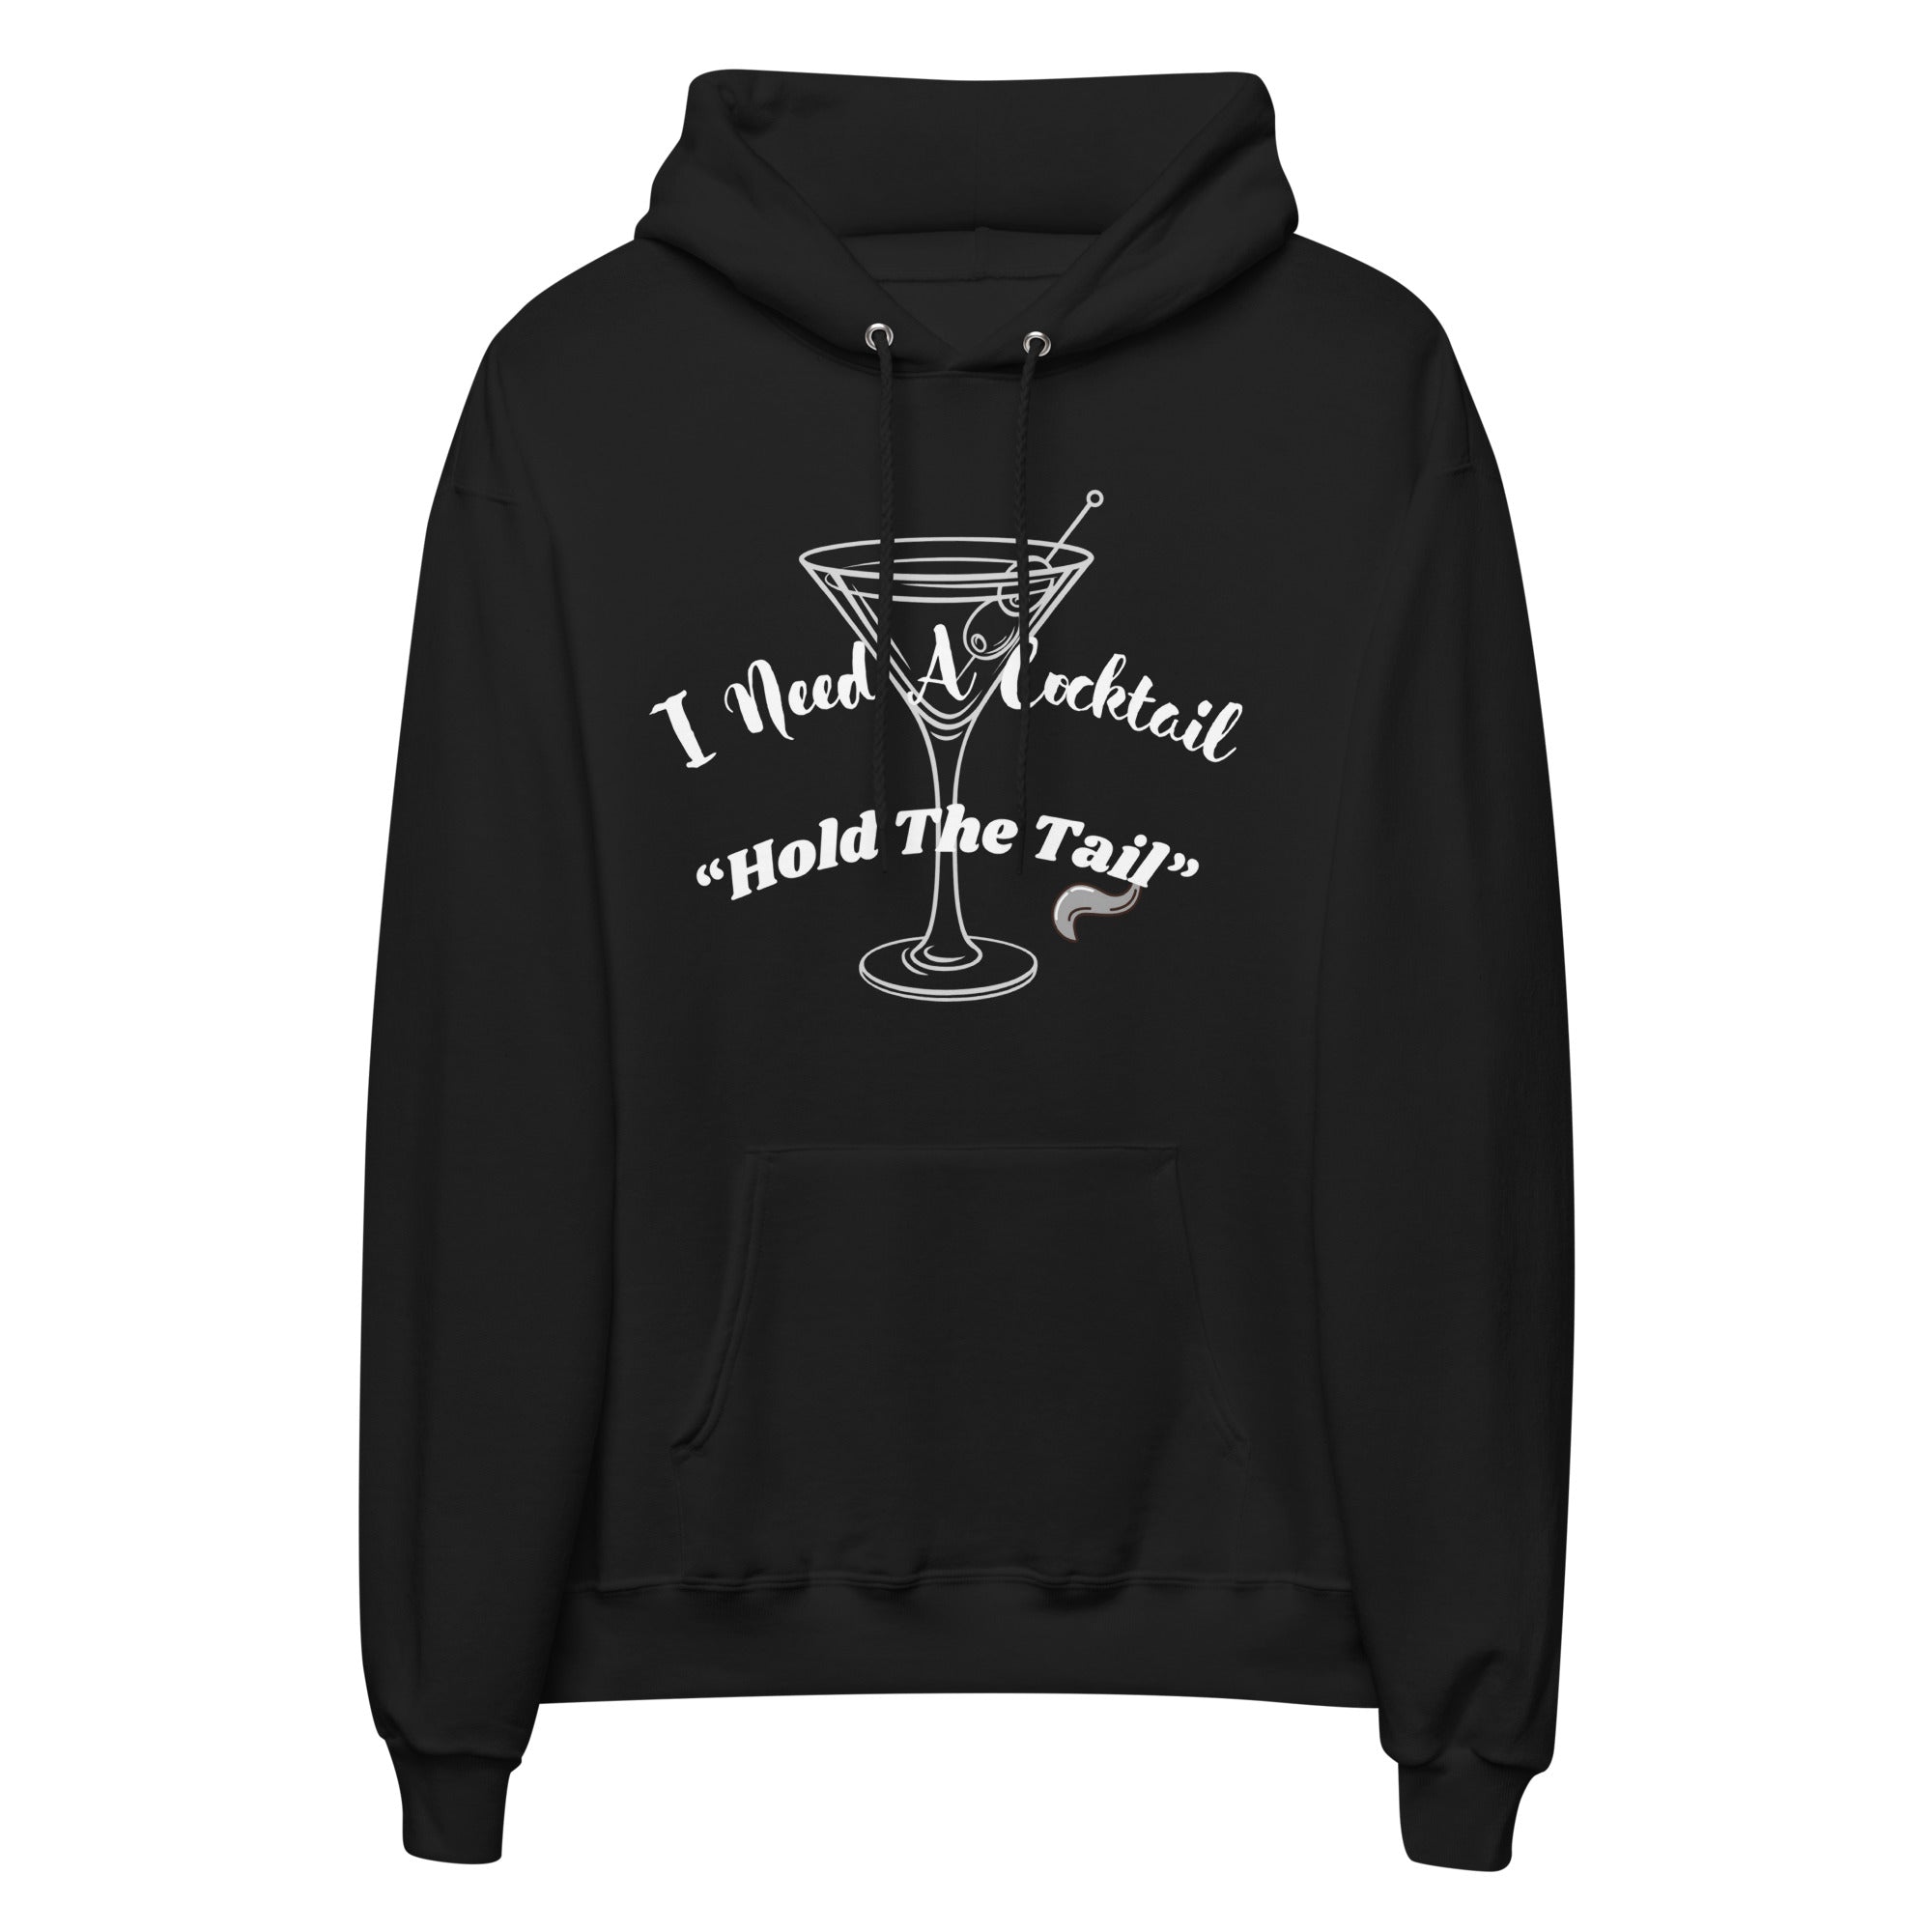 I Need a Cocktail Hoodie